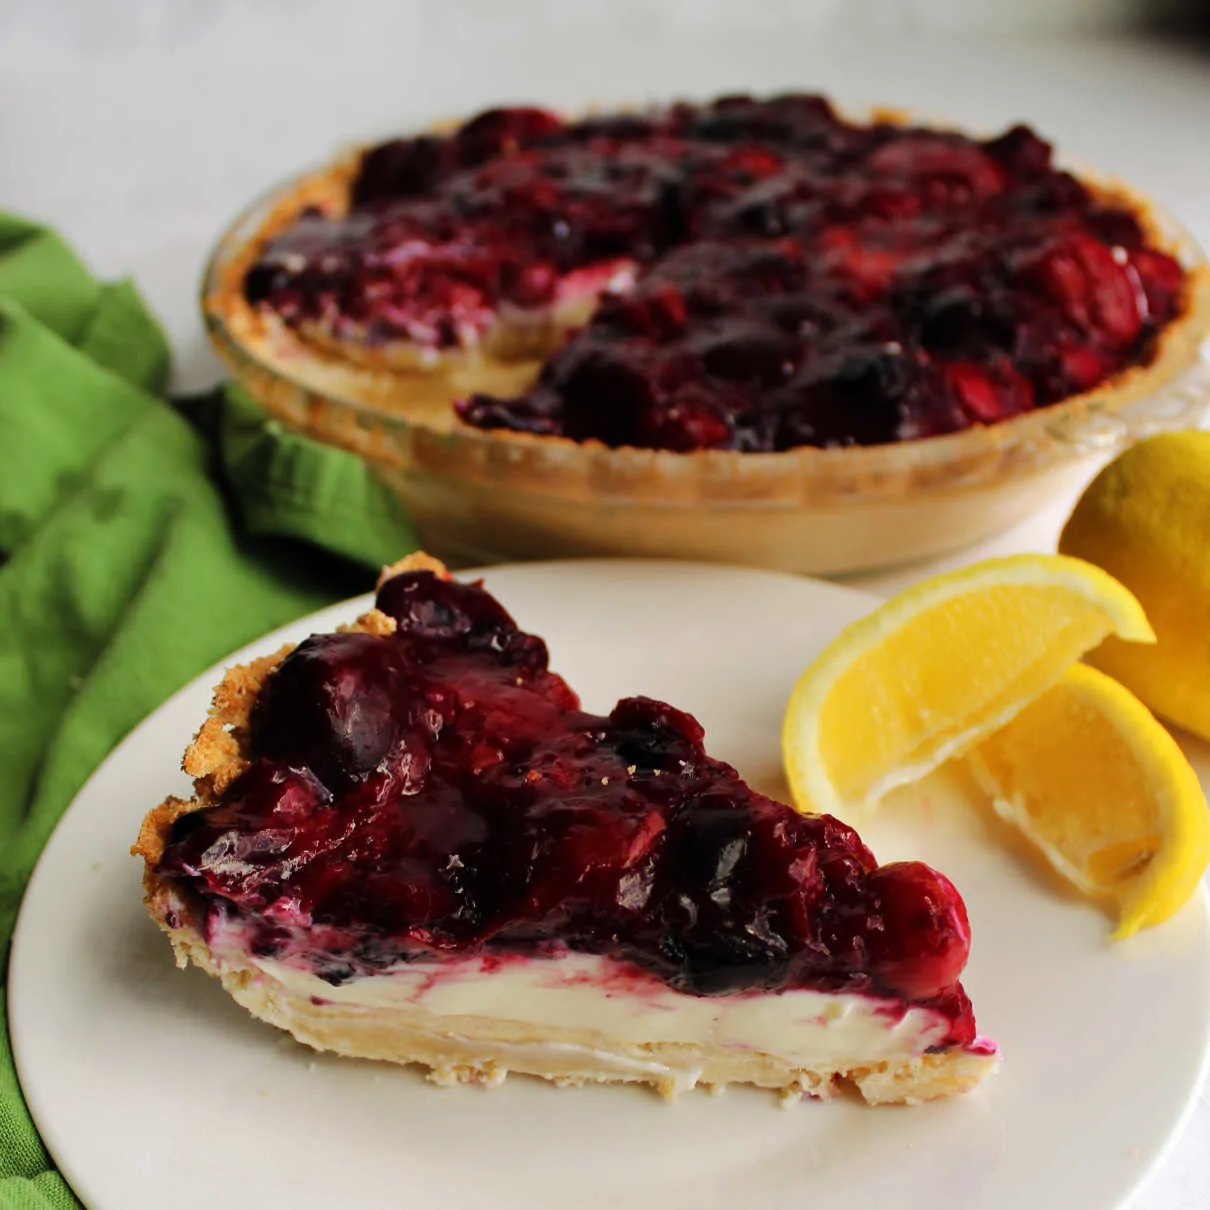 Slice of pie with creamy lemon filling and thick berry topping.